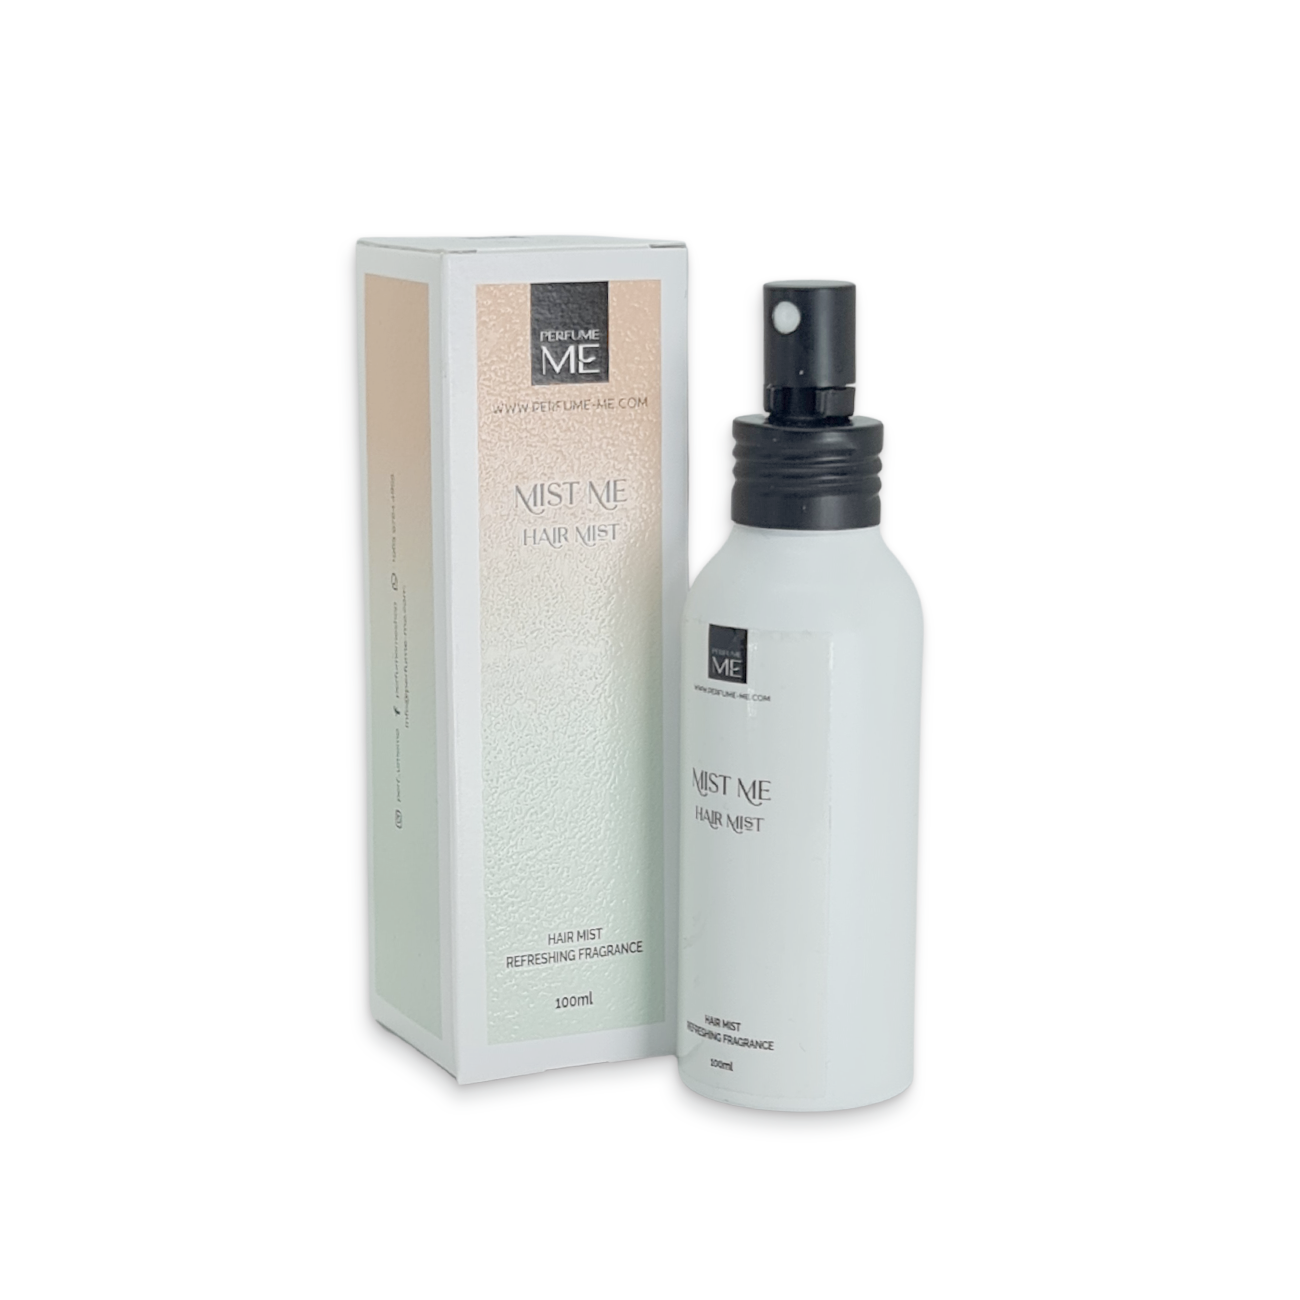 Mist ME 454: Hair Mist Similar to Afternoon Swim by Louis Vuitton